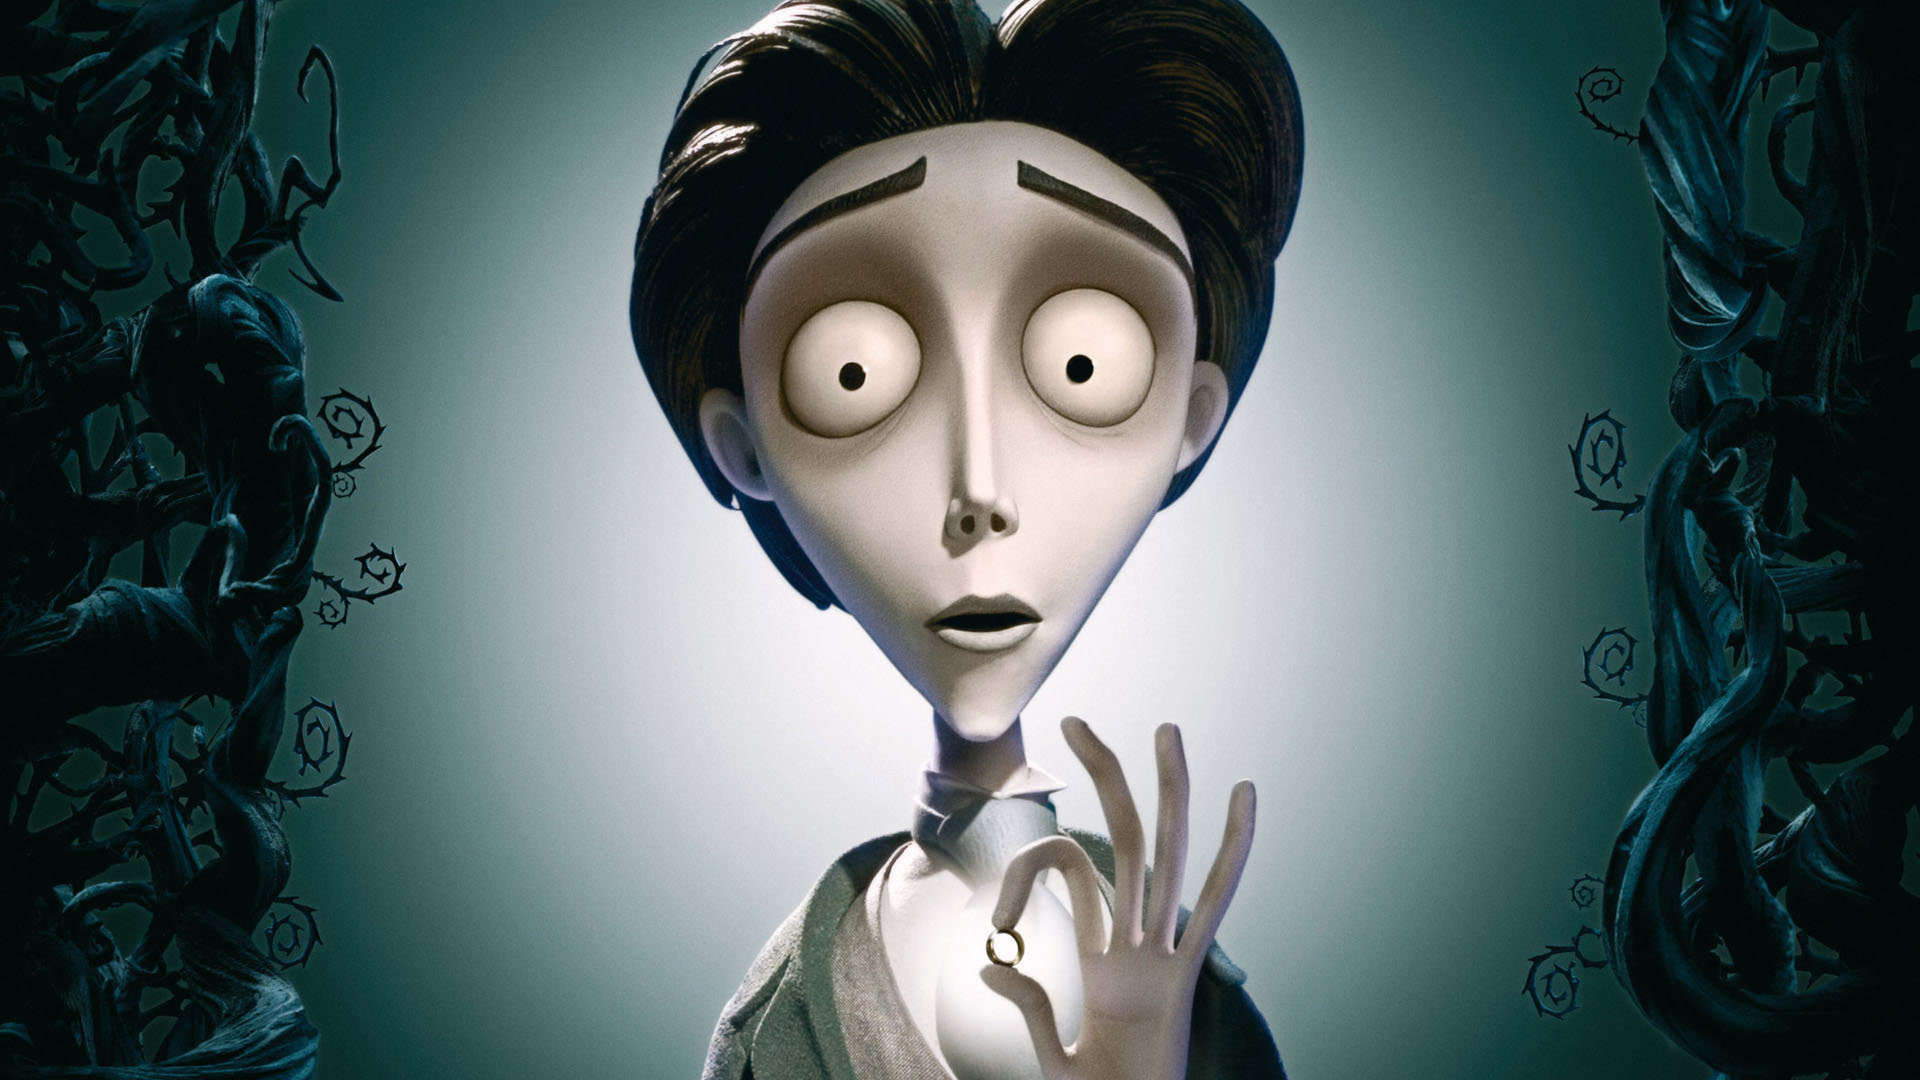 Corpse Bride Wallpaper Celebrity And Movie Pictures Photos